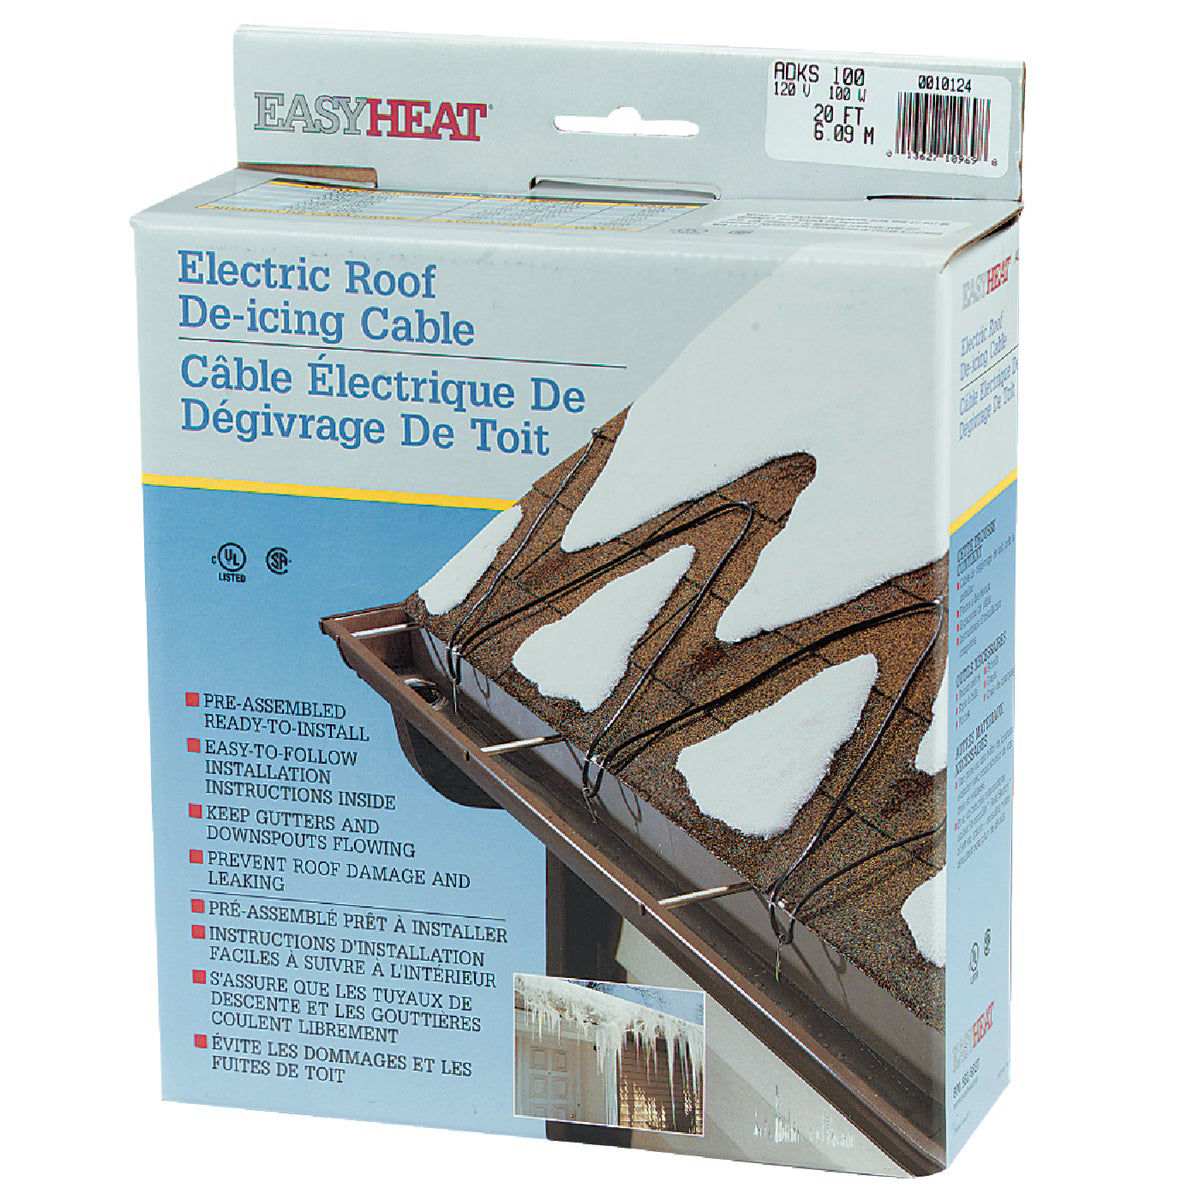 Easy Heat ADKS 100 ft. L De-Icing Cable For Roof and Gutter